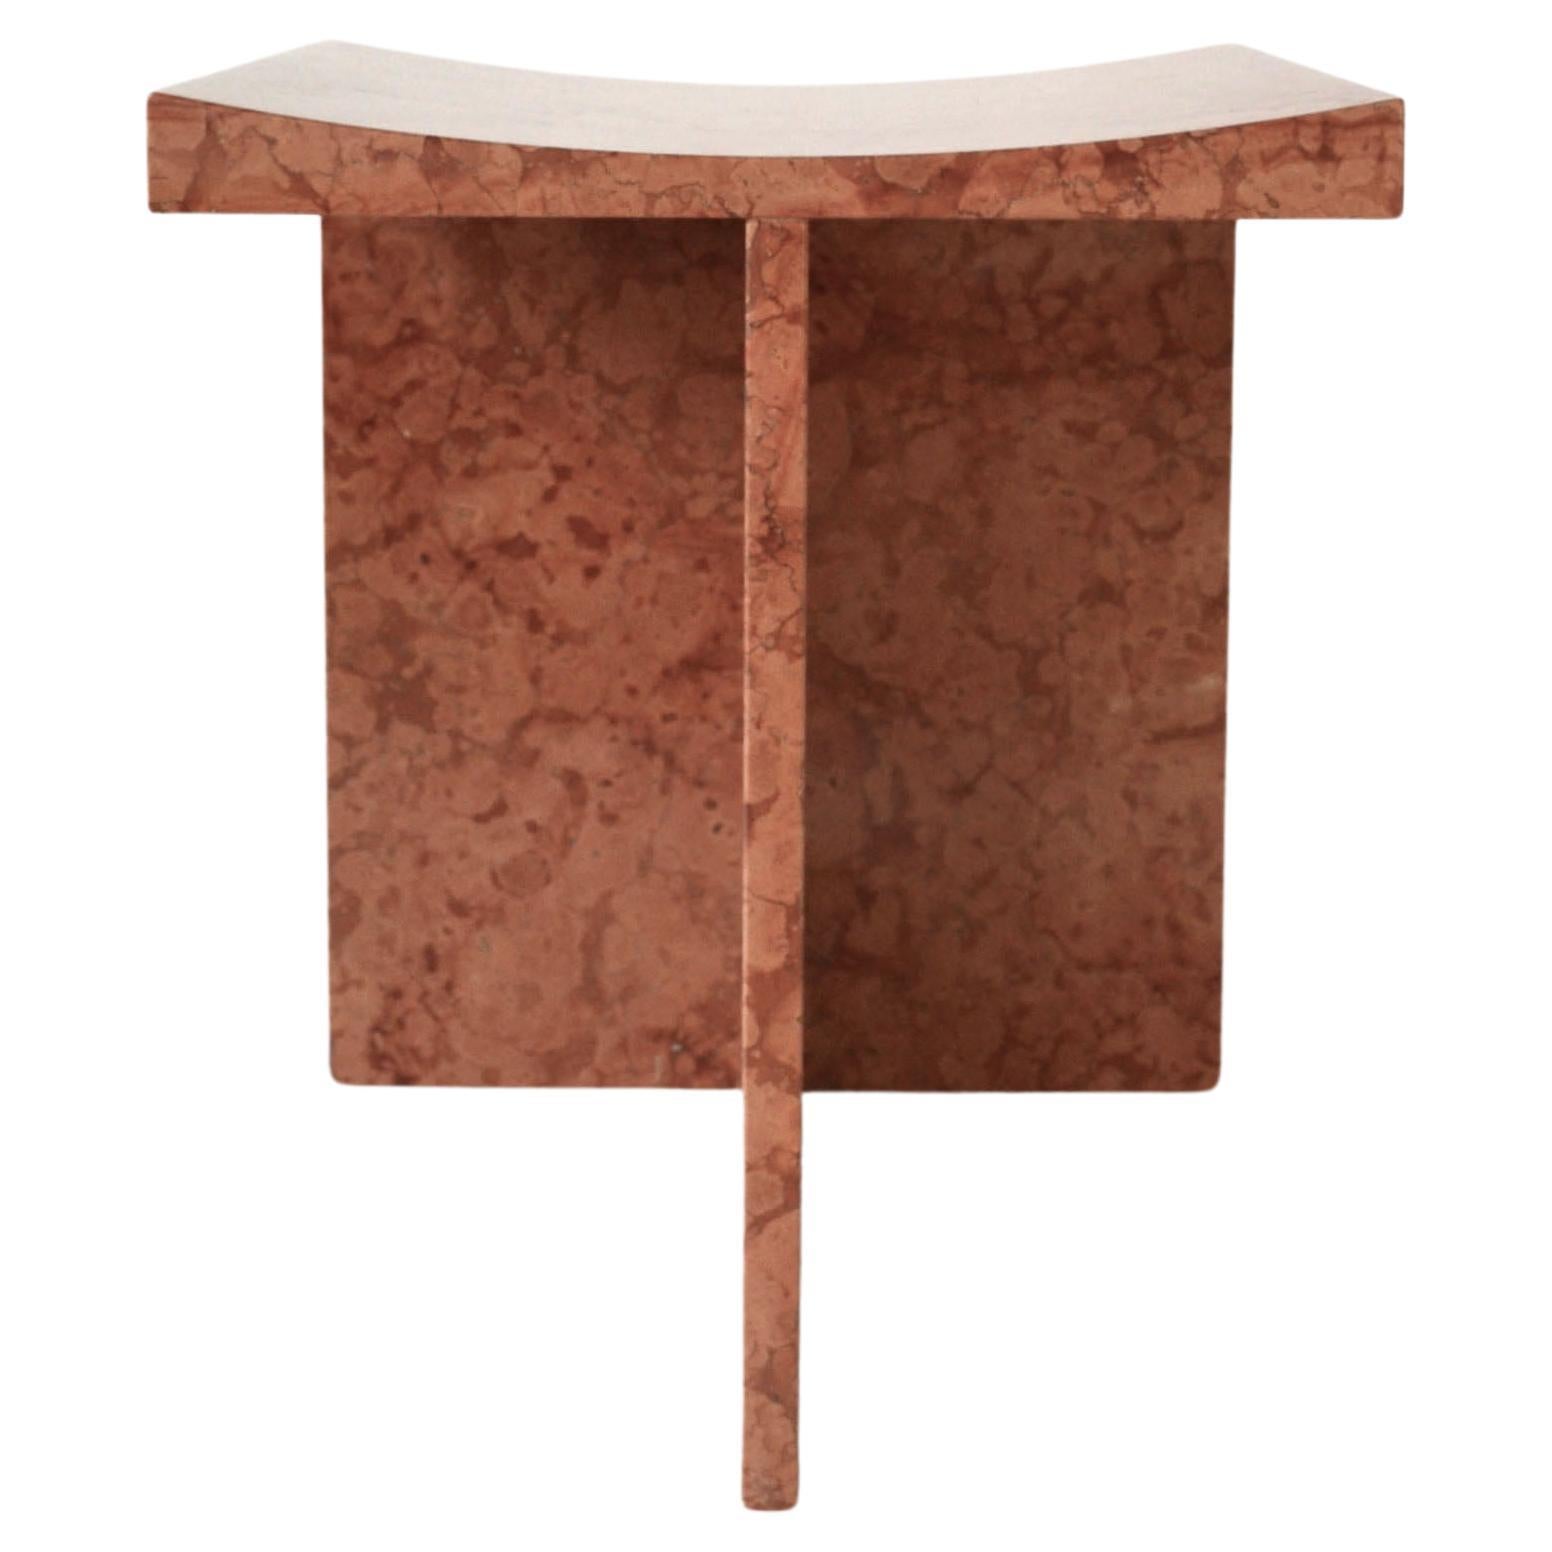 Thebes - Rosso Verona Marble Contemporary Stool Designed by McGannon Saad